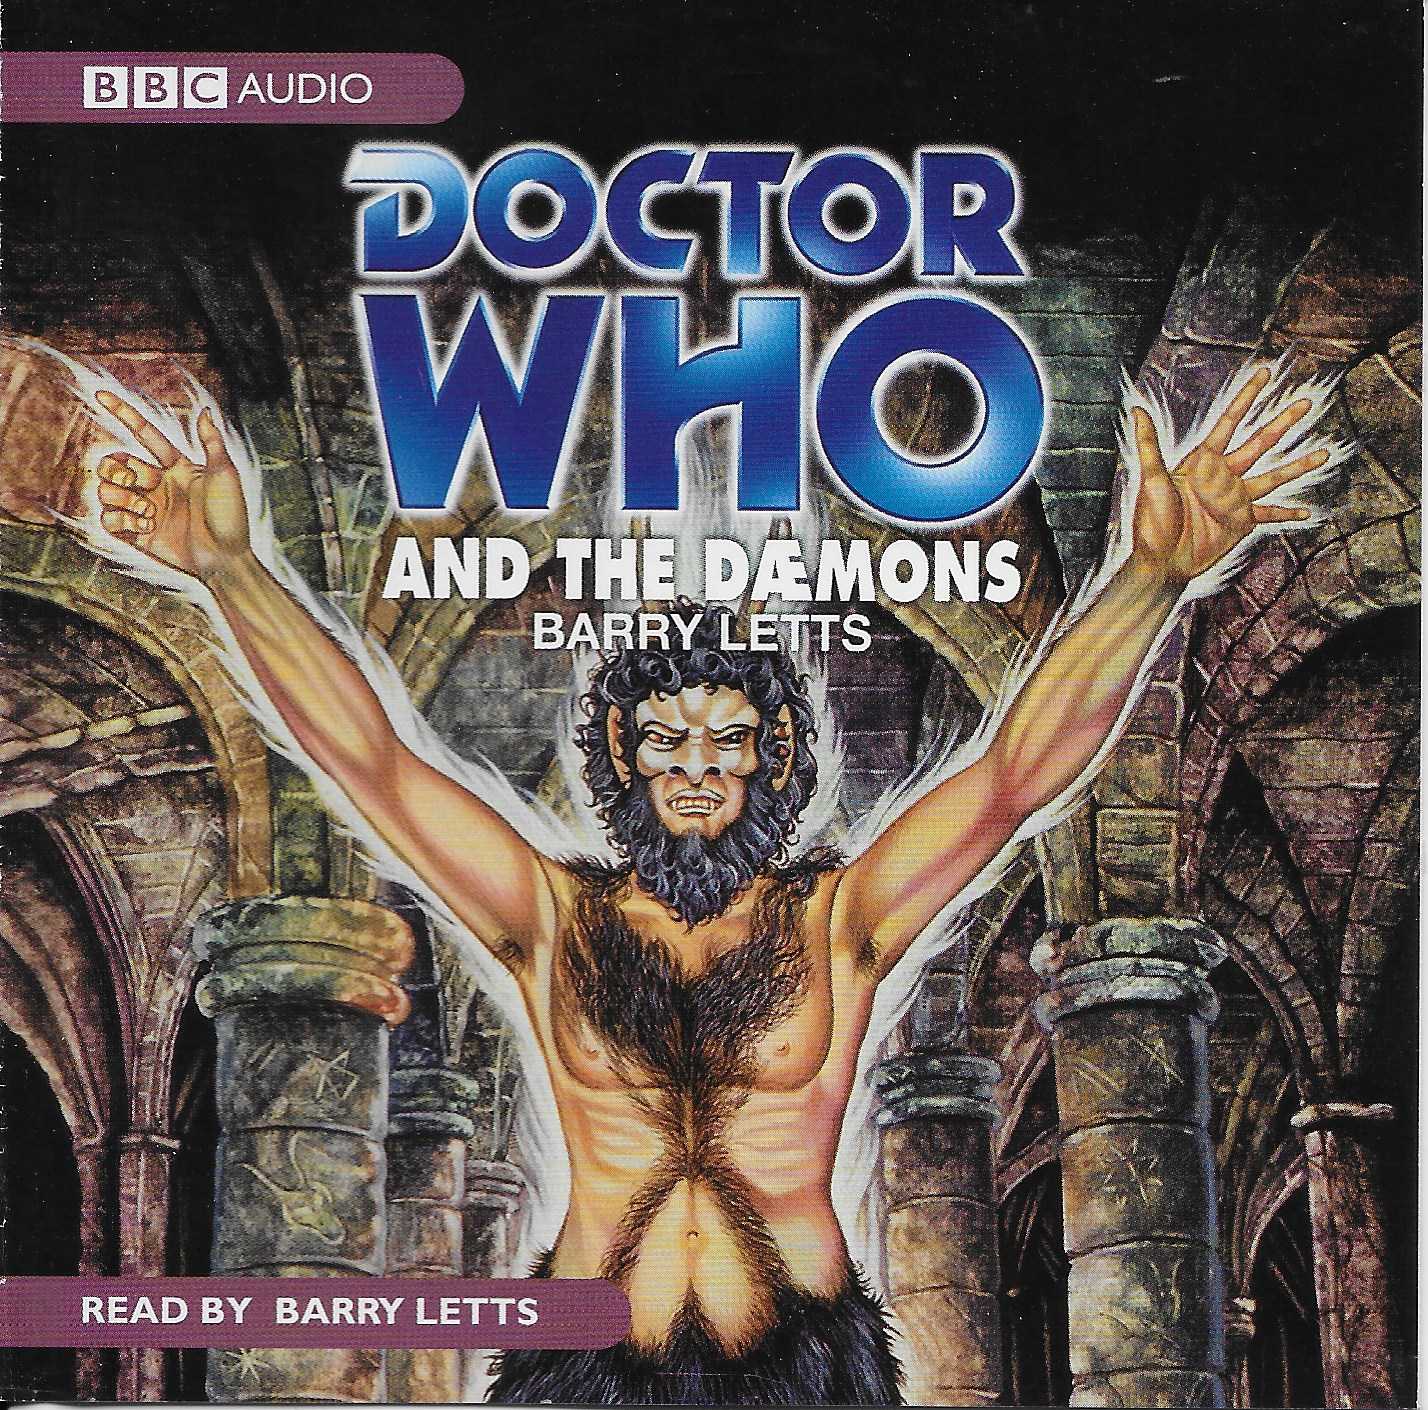 Picture of Doctor Who - And the Daemons by artist Barry Letts / Guy Leopold from the BBC cds - Records and Tapes library